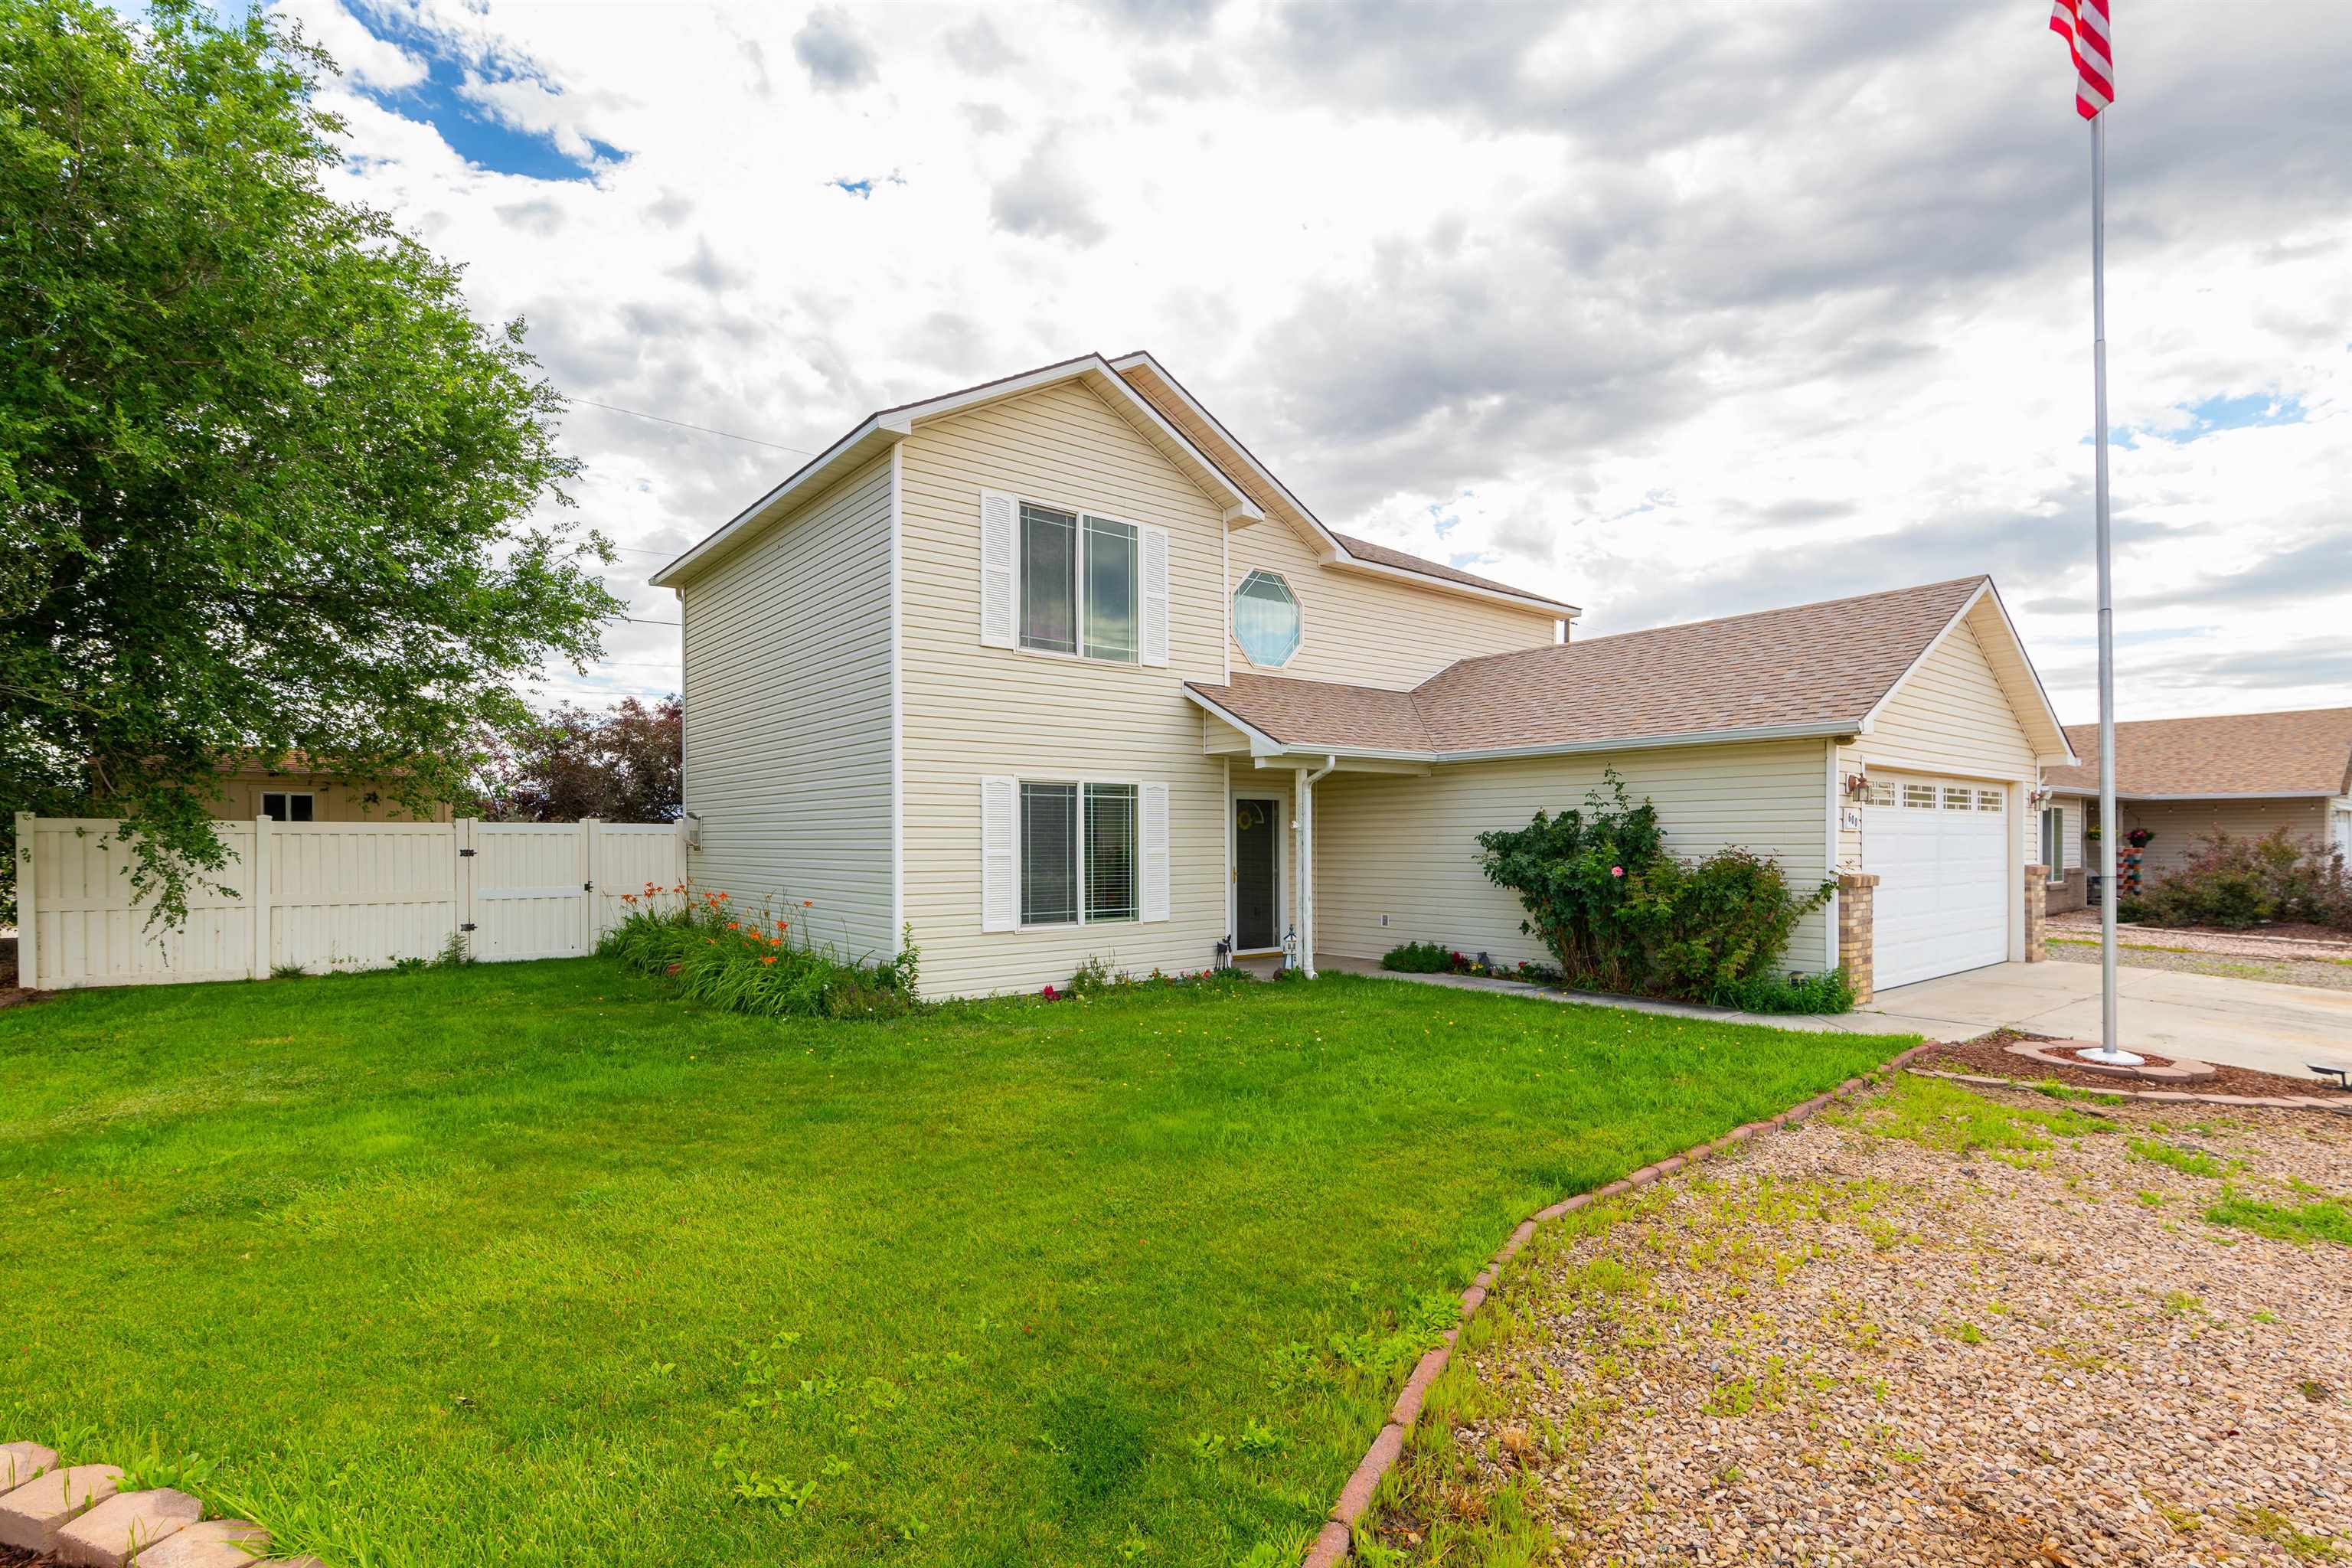 Built in 2005, this 3 bed 2 1/2 bath home sits on a corner lot with rv parking in a conveniently located subdivision in fruita colorado.  Close to shopping, walking trails, river access, and medical facilities. Fenced in yard, storage shed, developed landscaping, back deck, freshly painted, open kitchen, and ready for a new owner.  Contact us today to set up a showing.